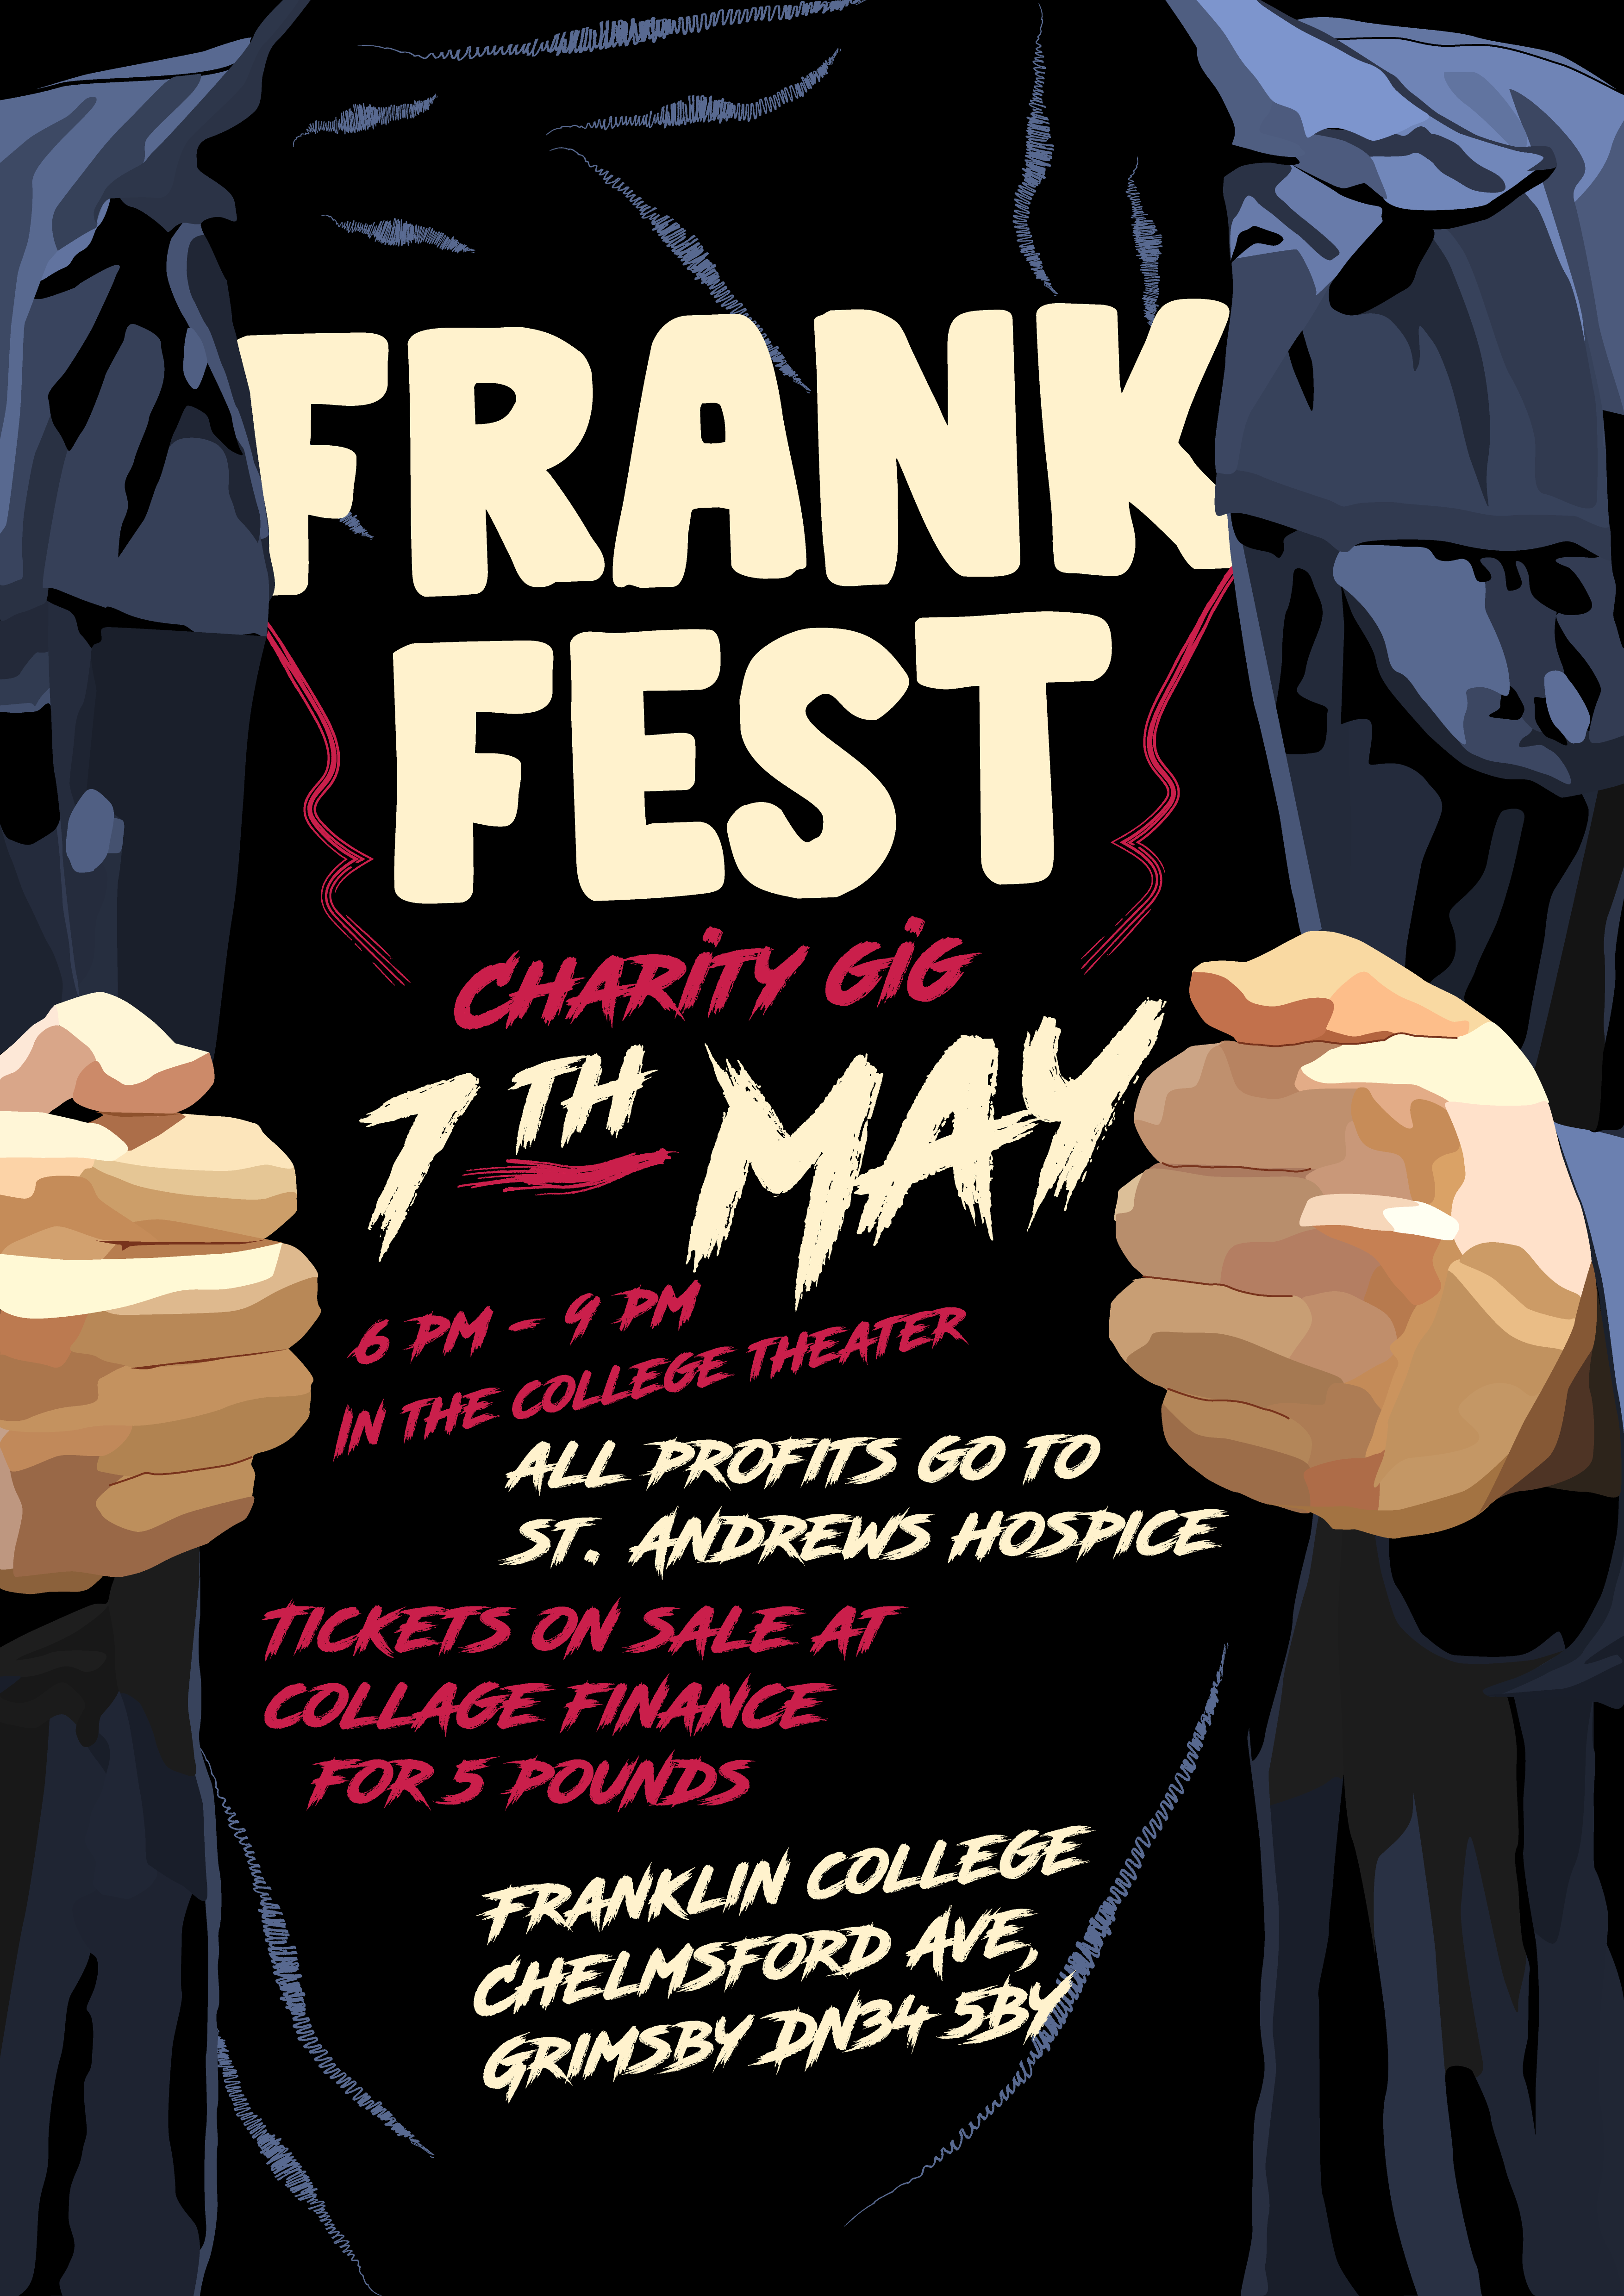 My poster for the FrankFest charity event